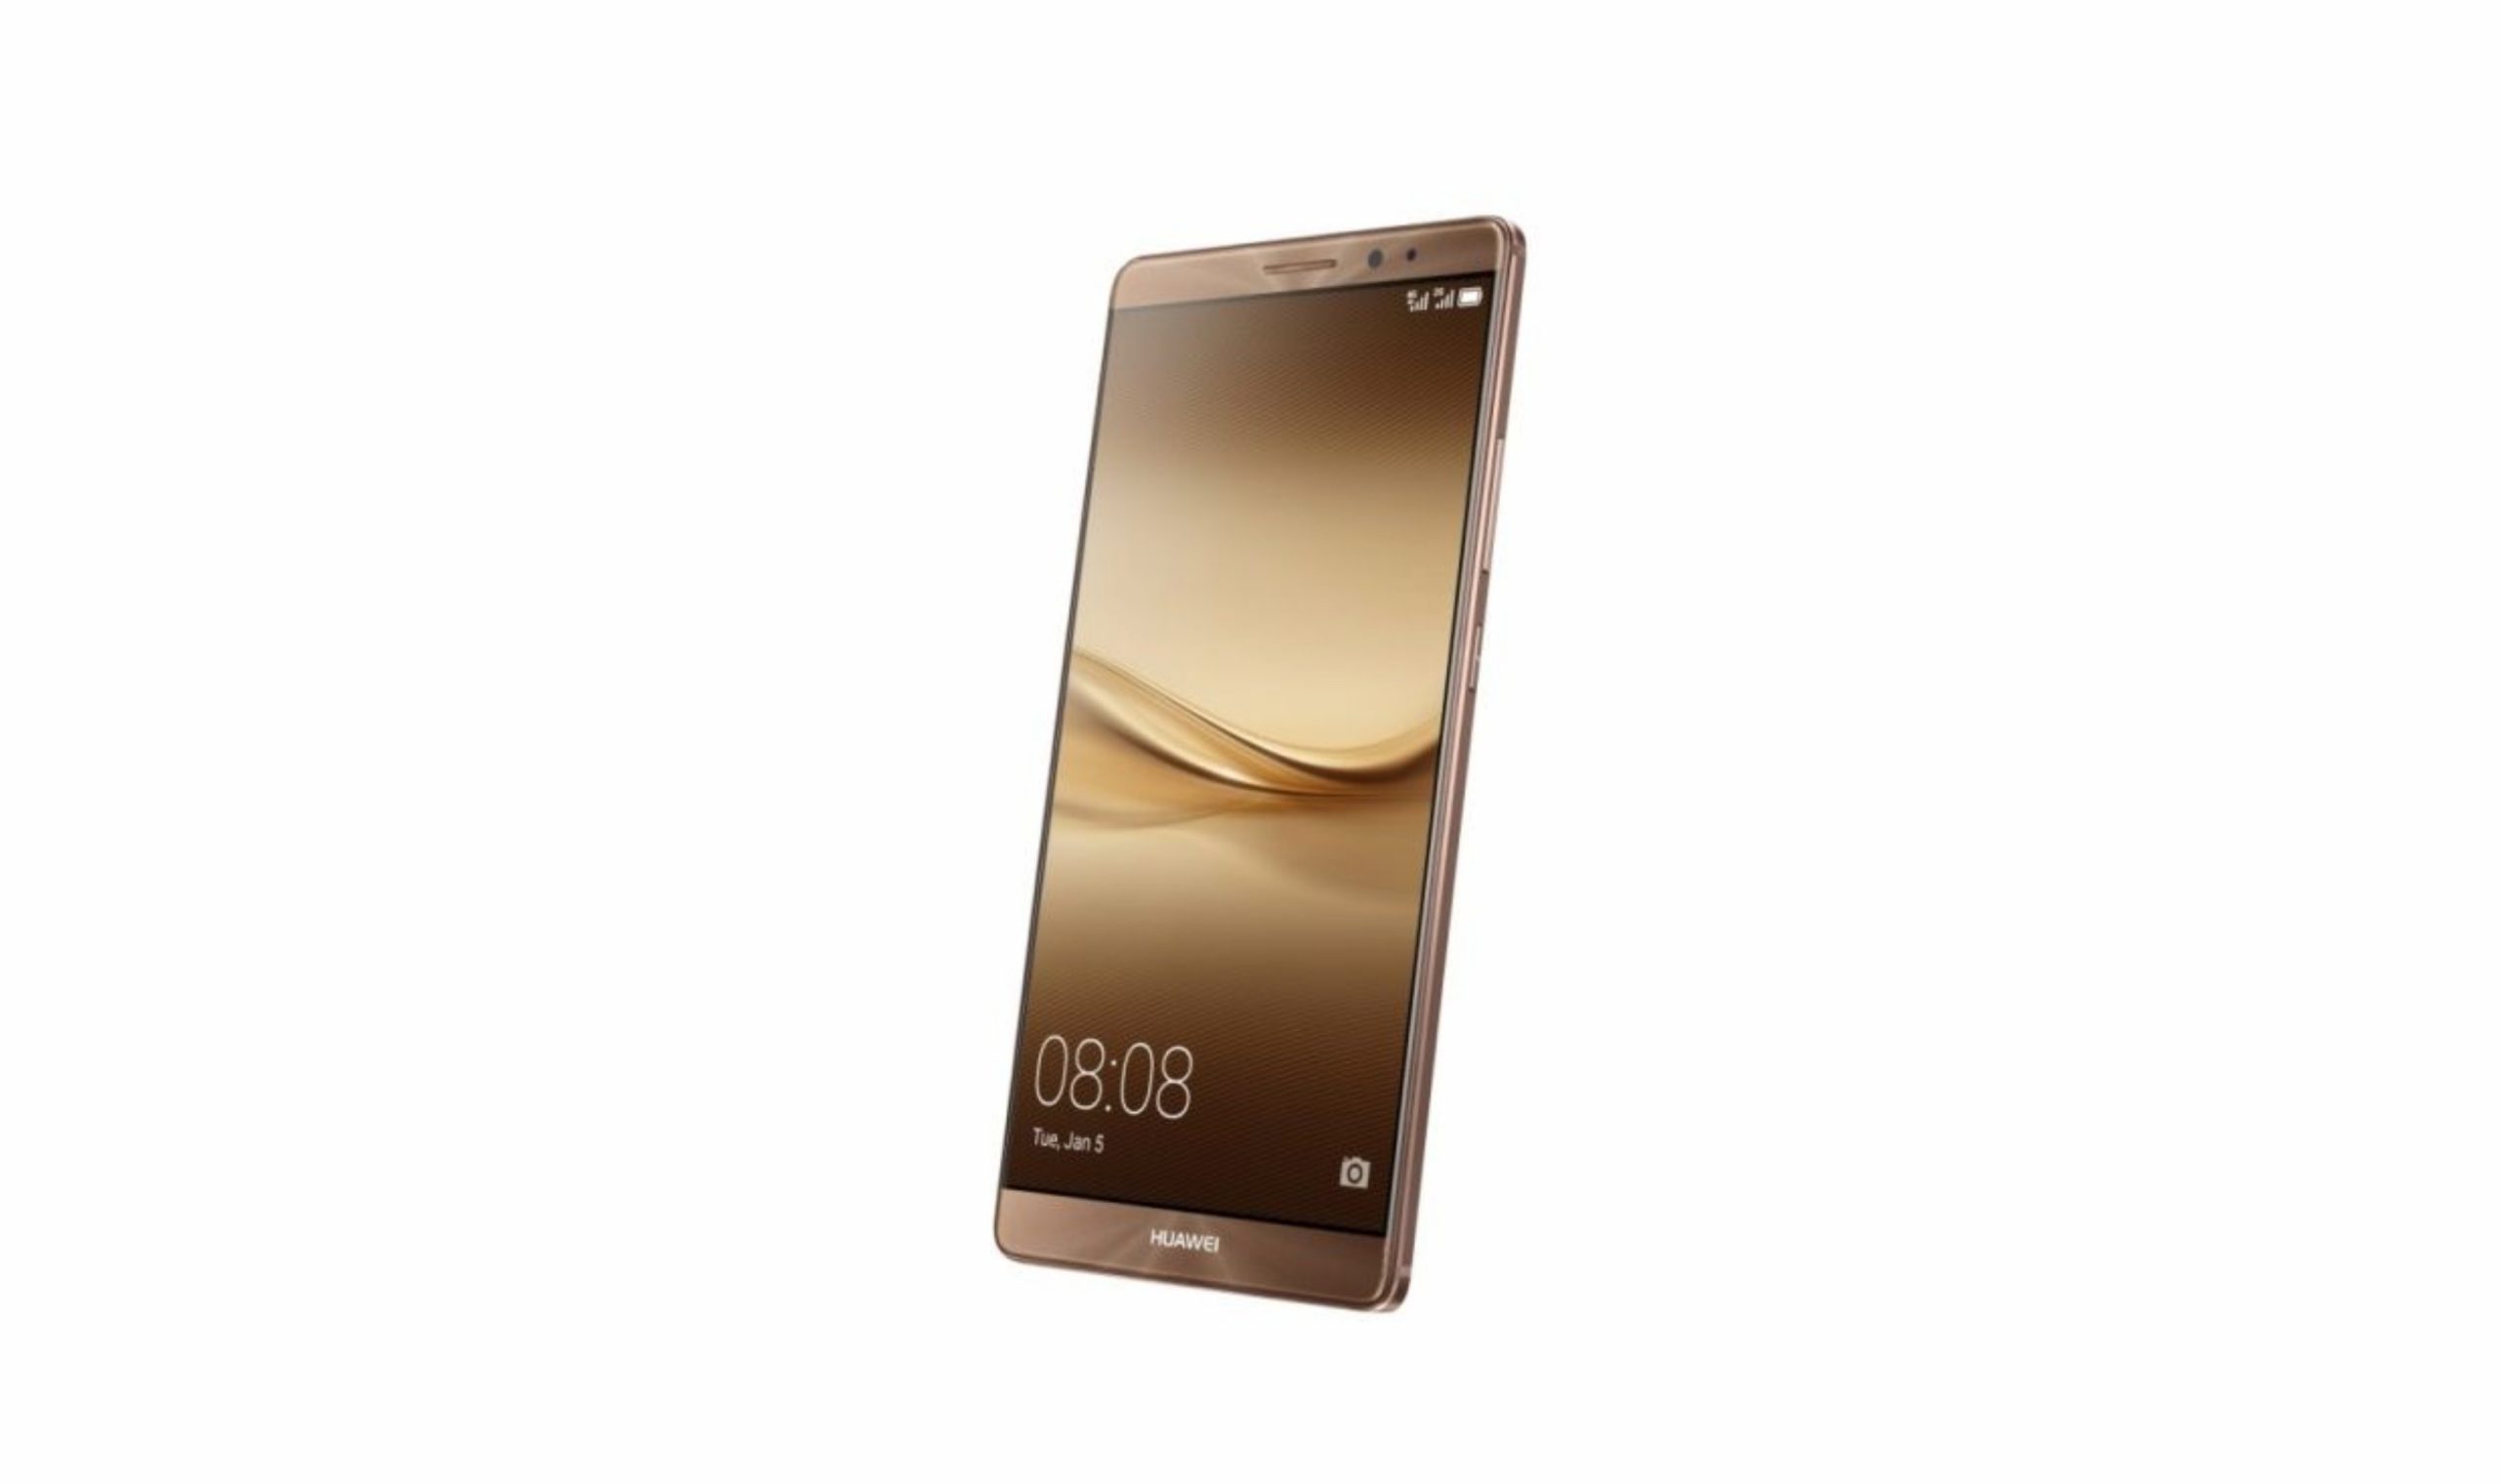 The almost 5-year-old HUAWEI Mate 8 is receiving a new system update